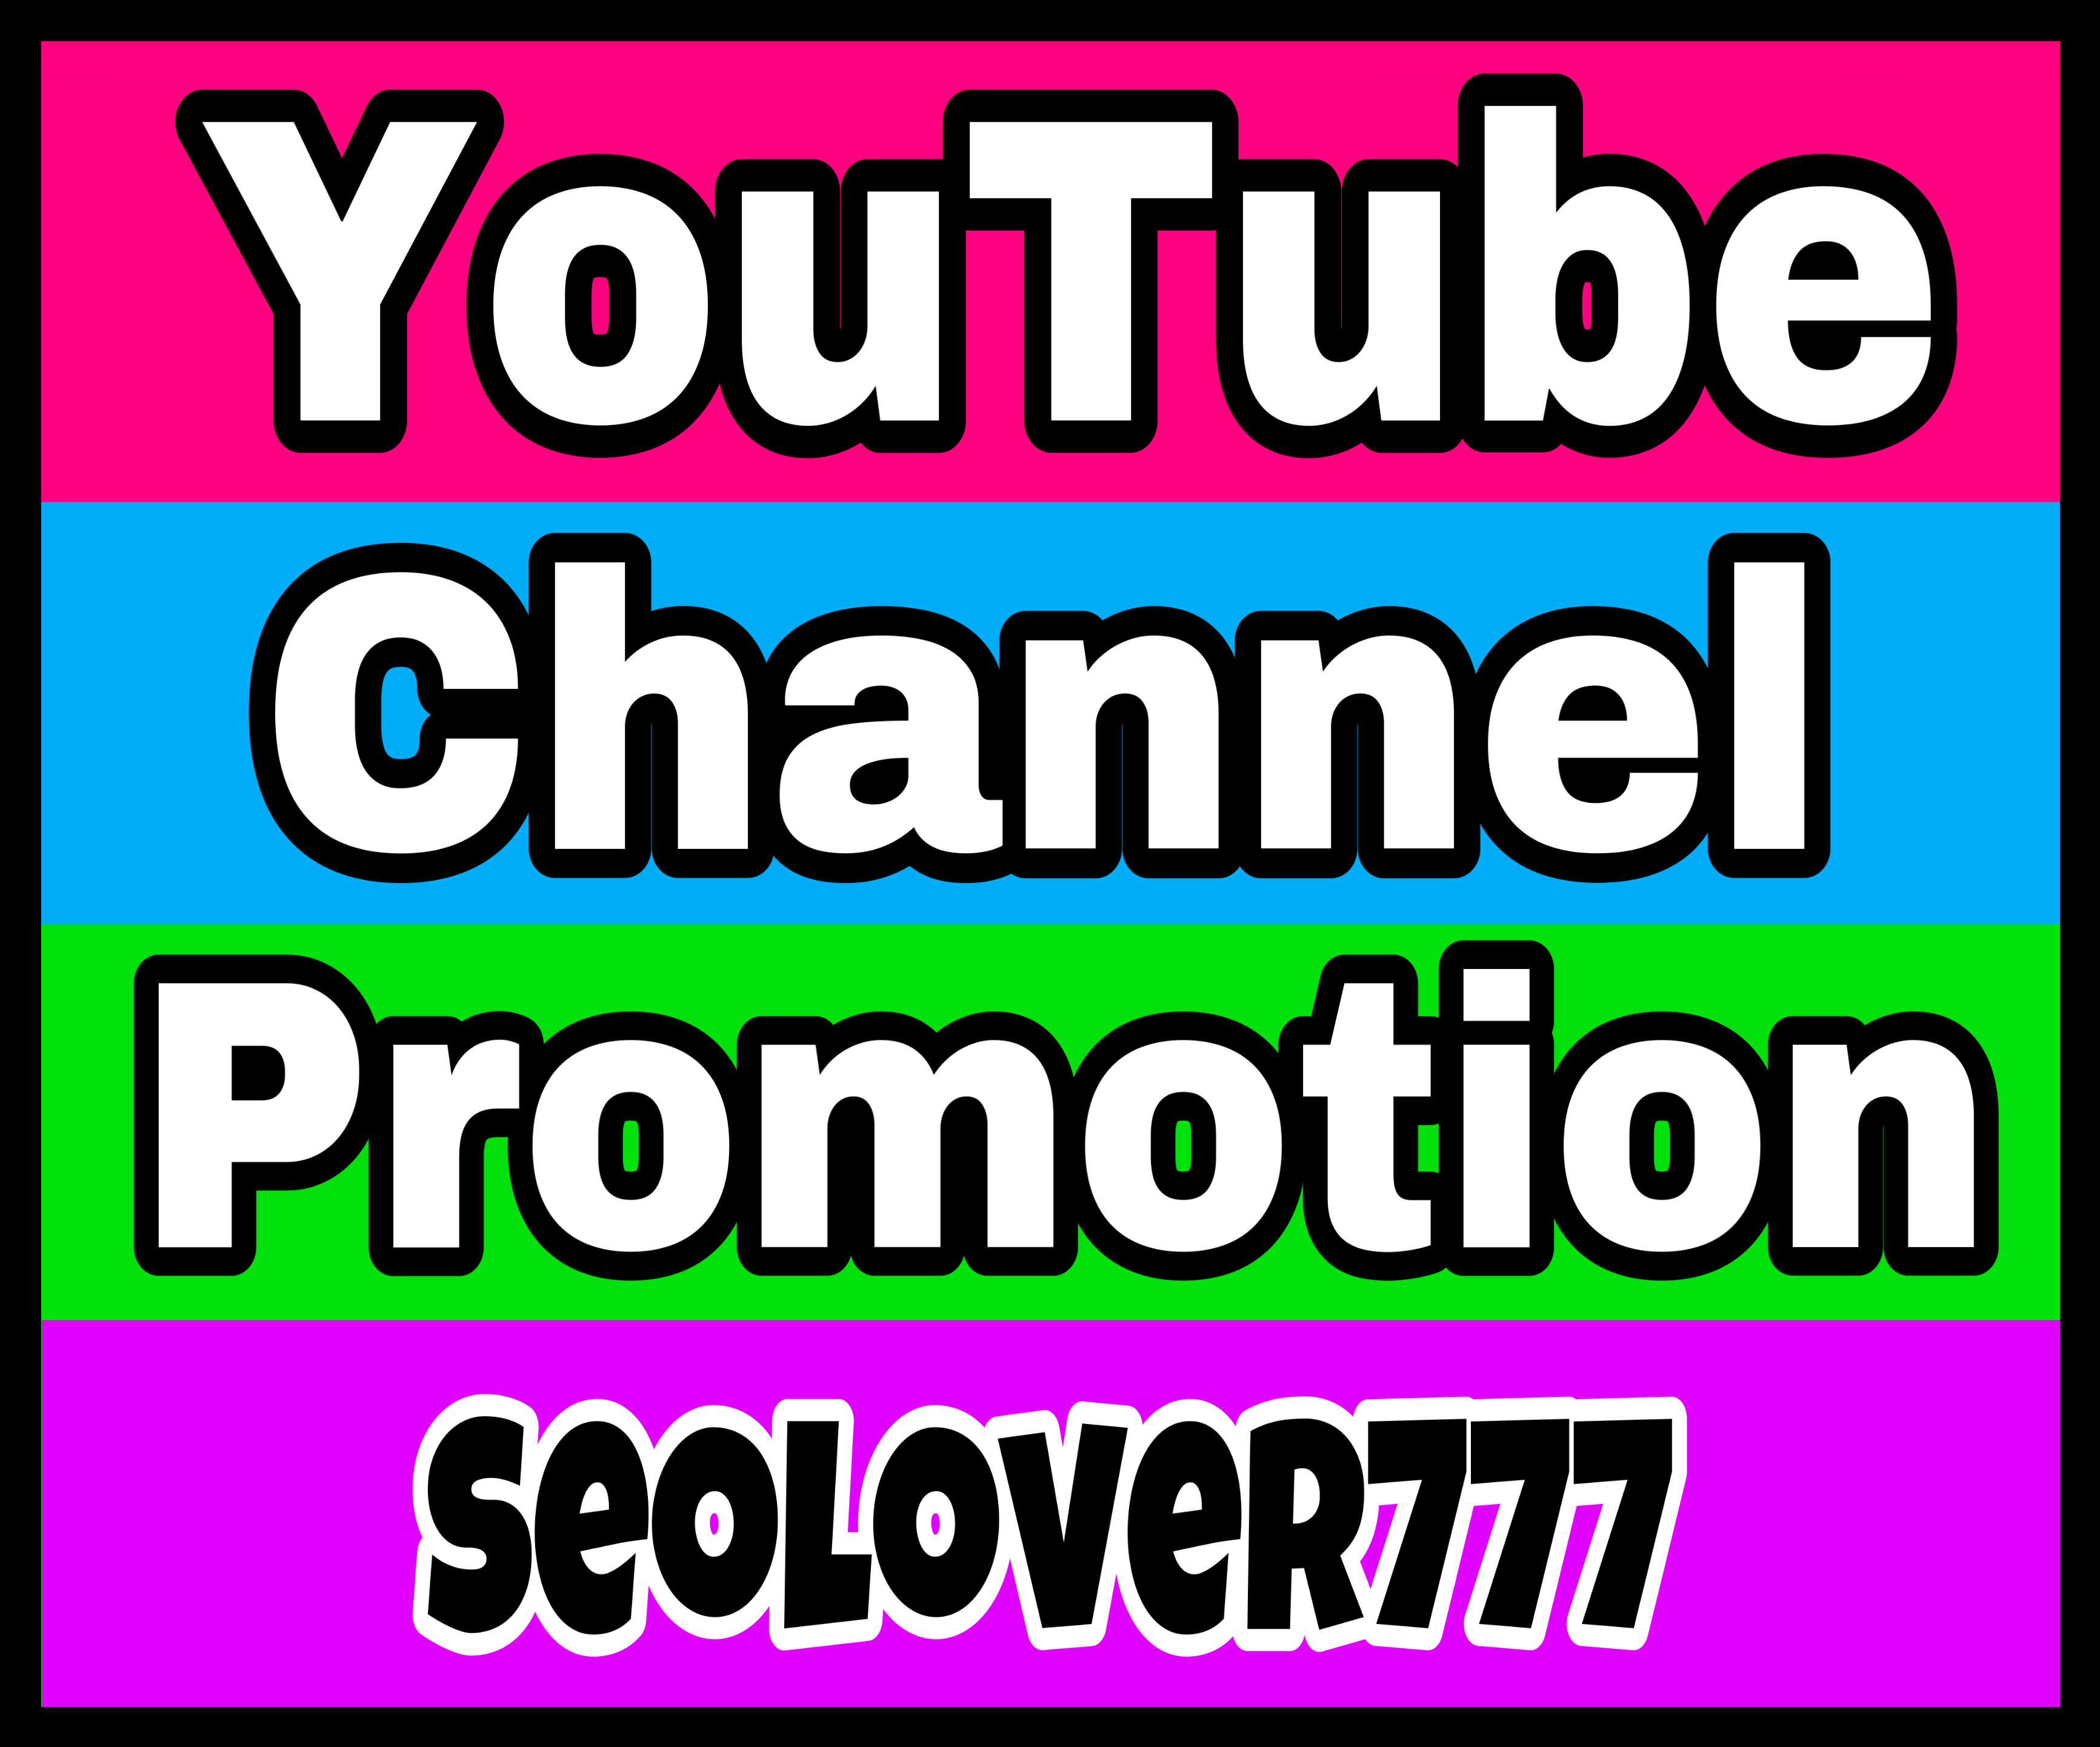  YouTube real and organic promotion and marketing